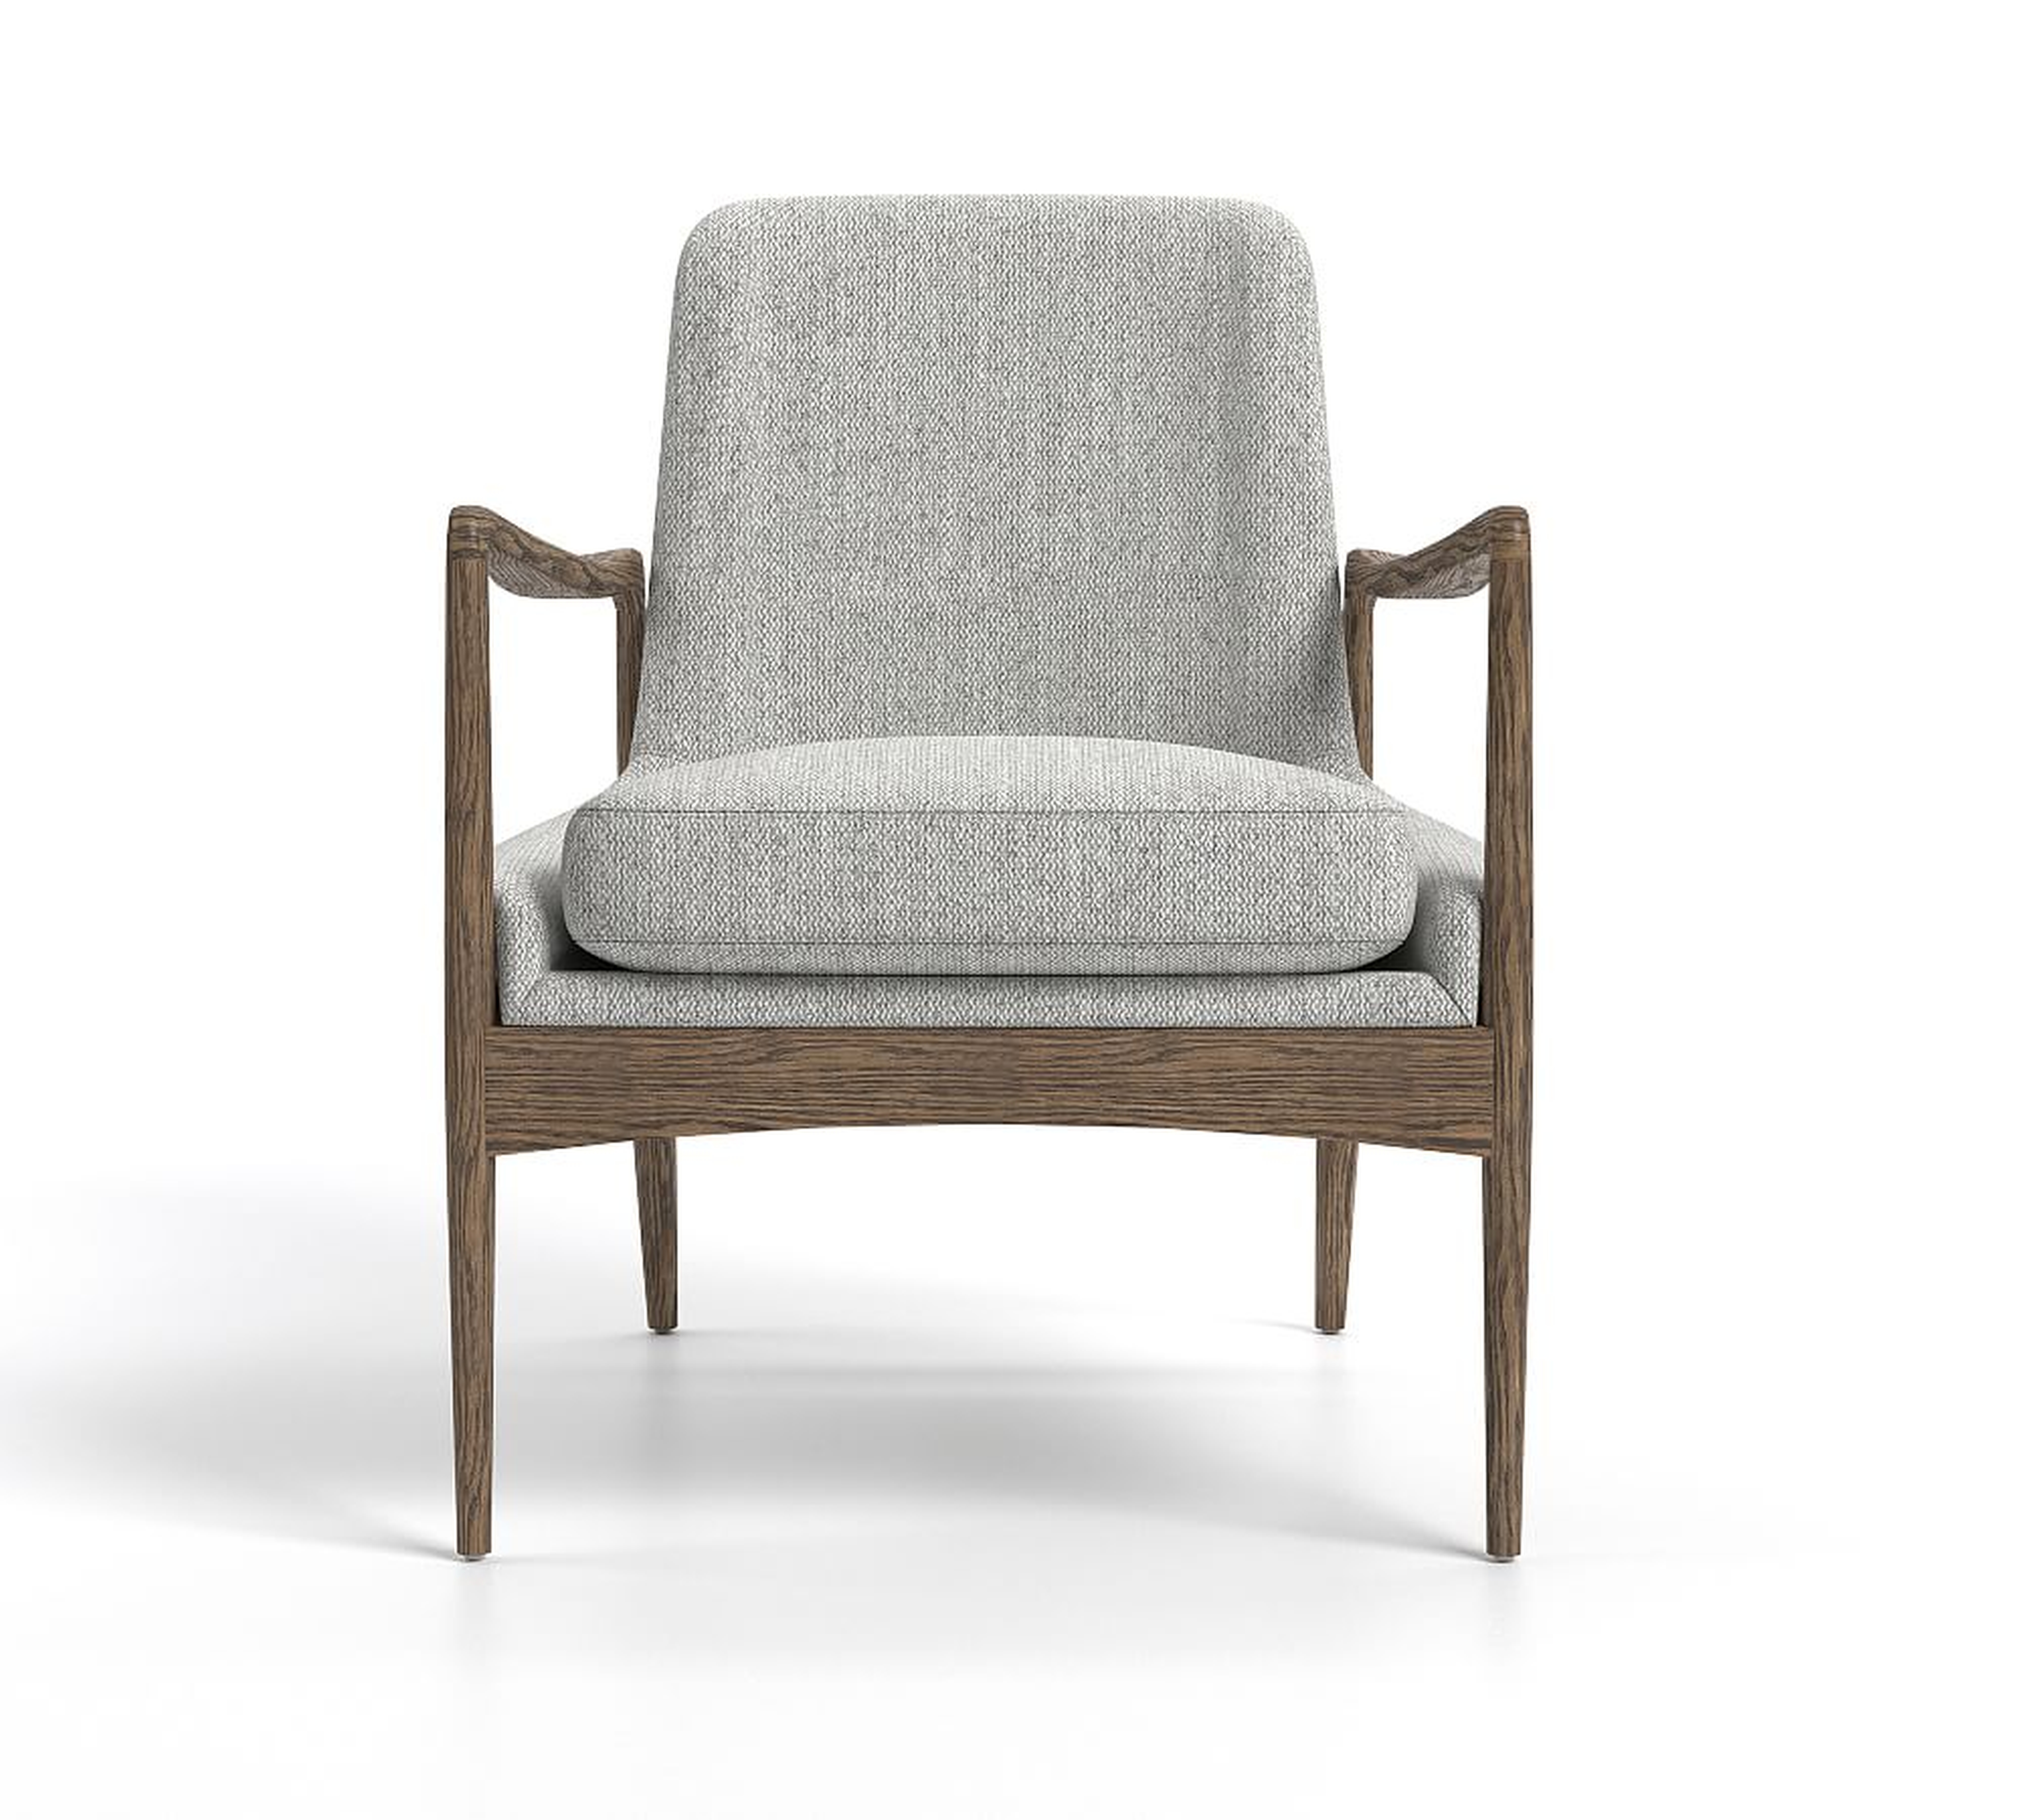 Fairview Upholstered Armchair, Manor Gray - Pottery Barn